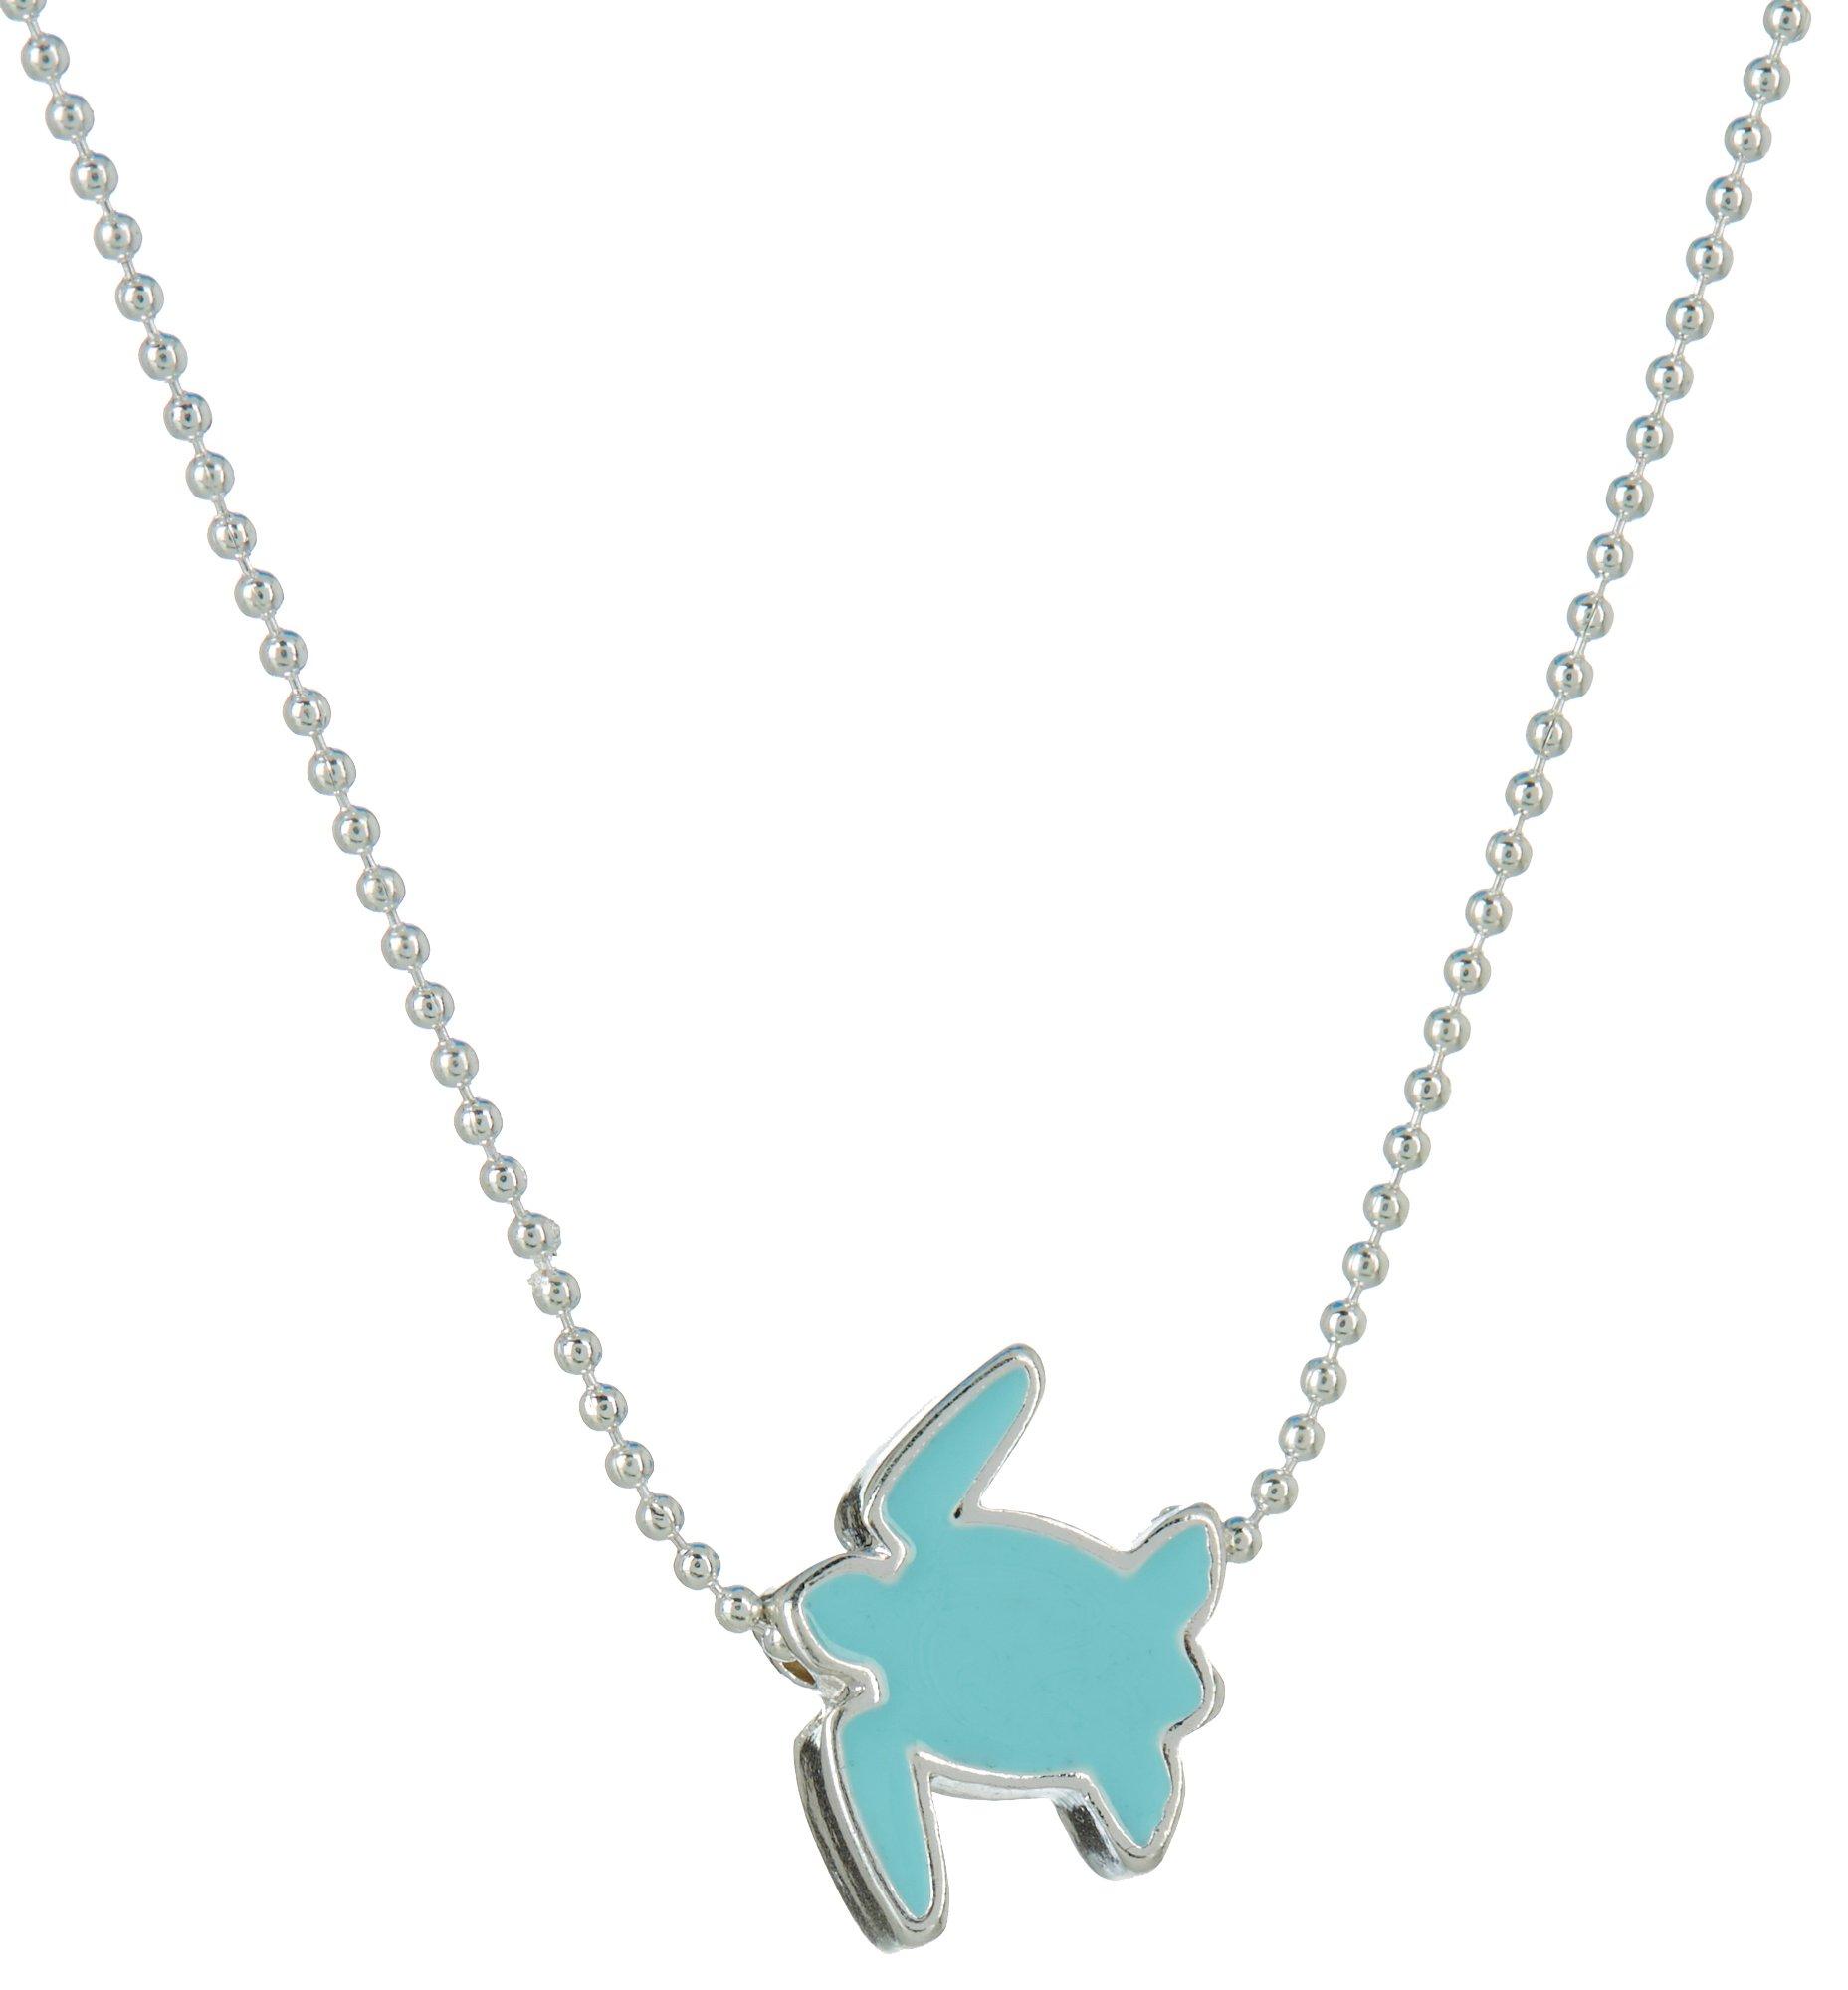 Enamel Turtle Charm 16 In. Chain Necklace